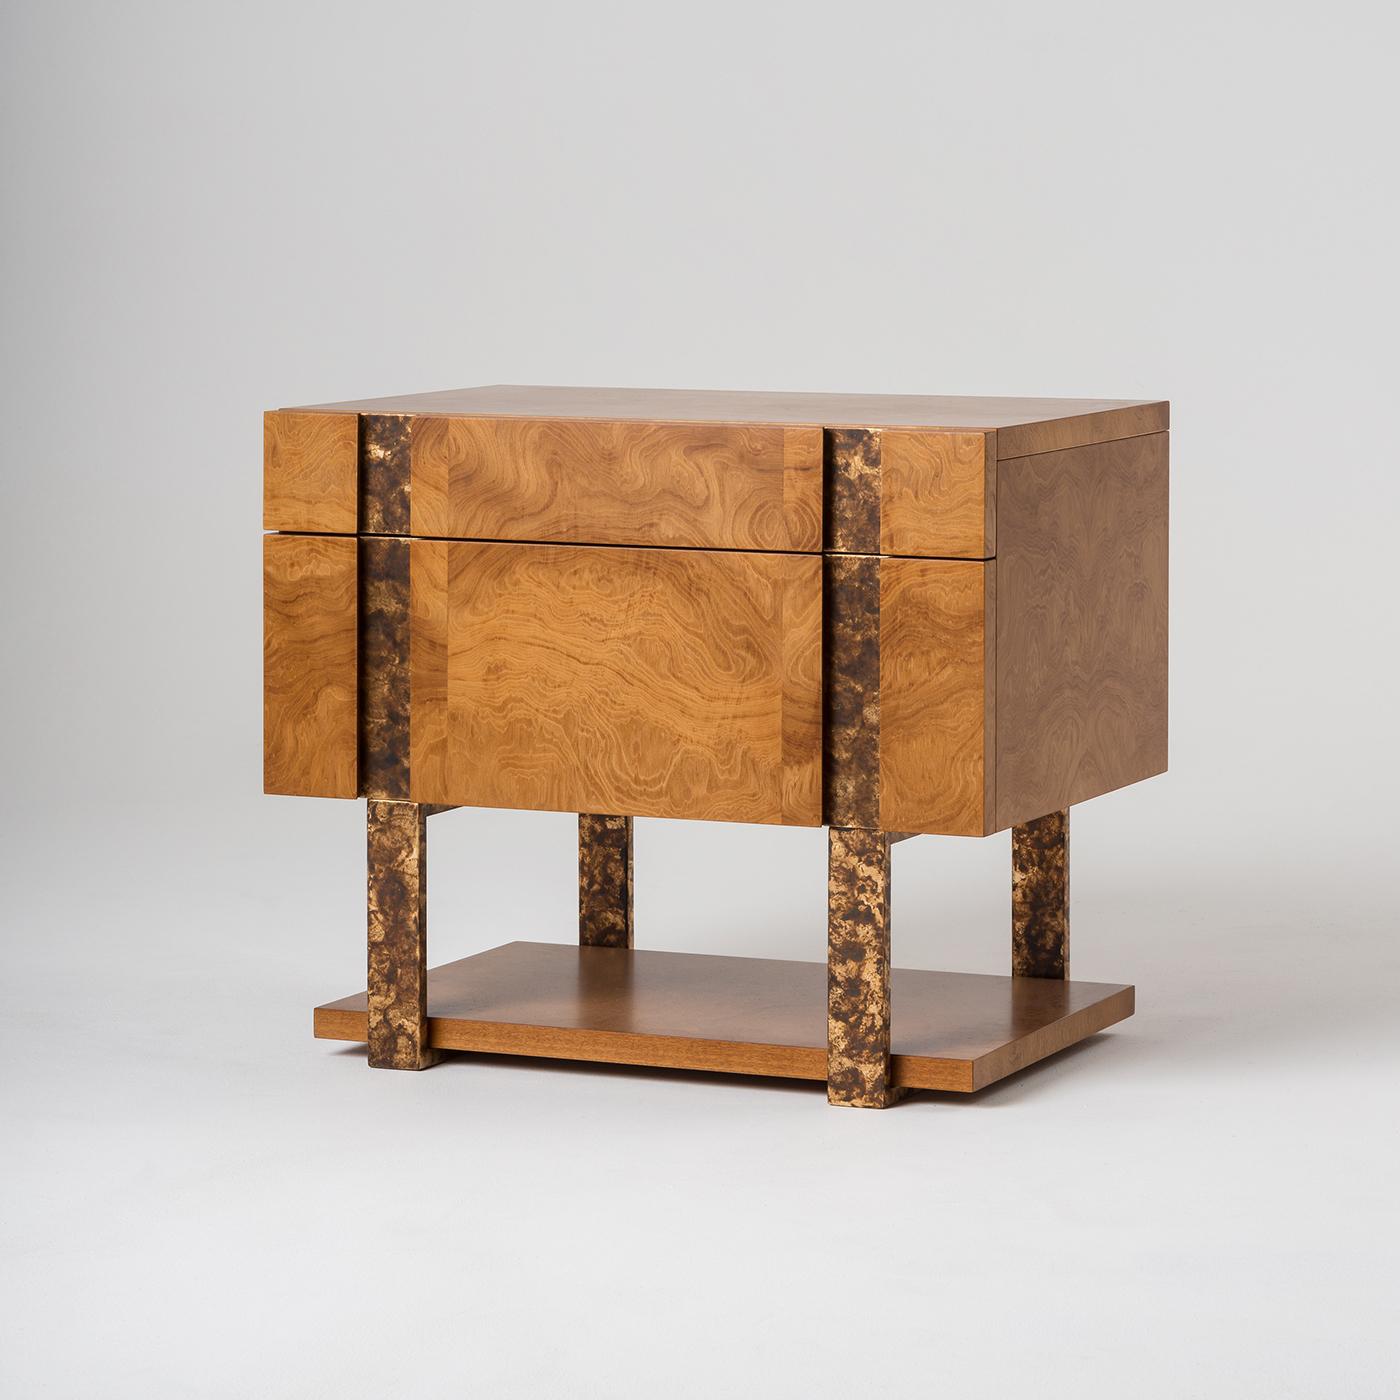 Diadema is a series composed of chest of drawers, dressing table and bedside table covered in myrtle briar and steel in gold leaf treated with oxide. Essential design, with precious details: from the inside of the drawers covered in canvas to the